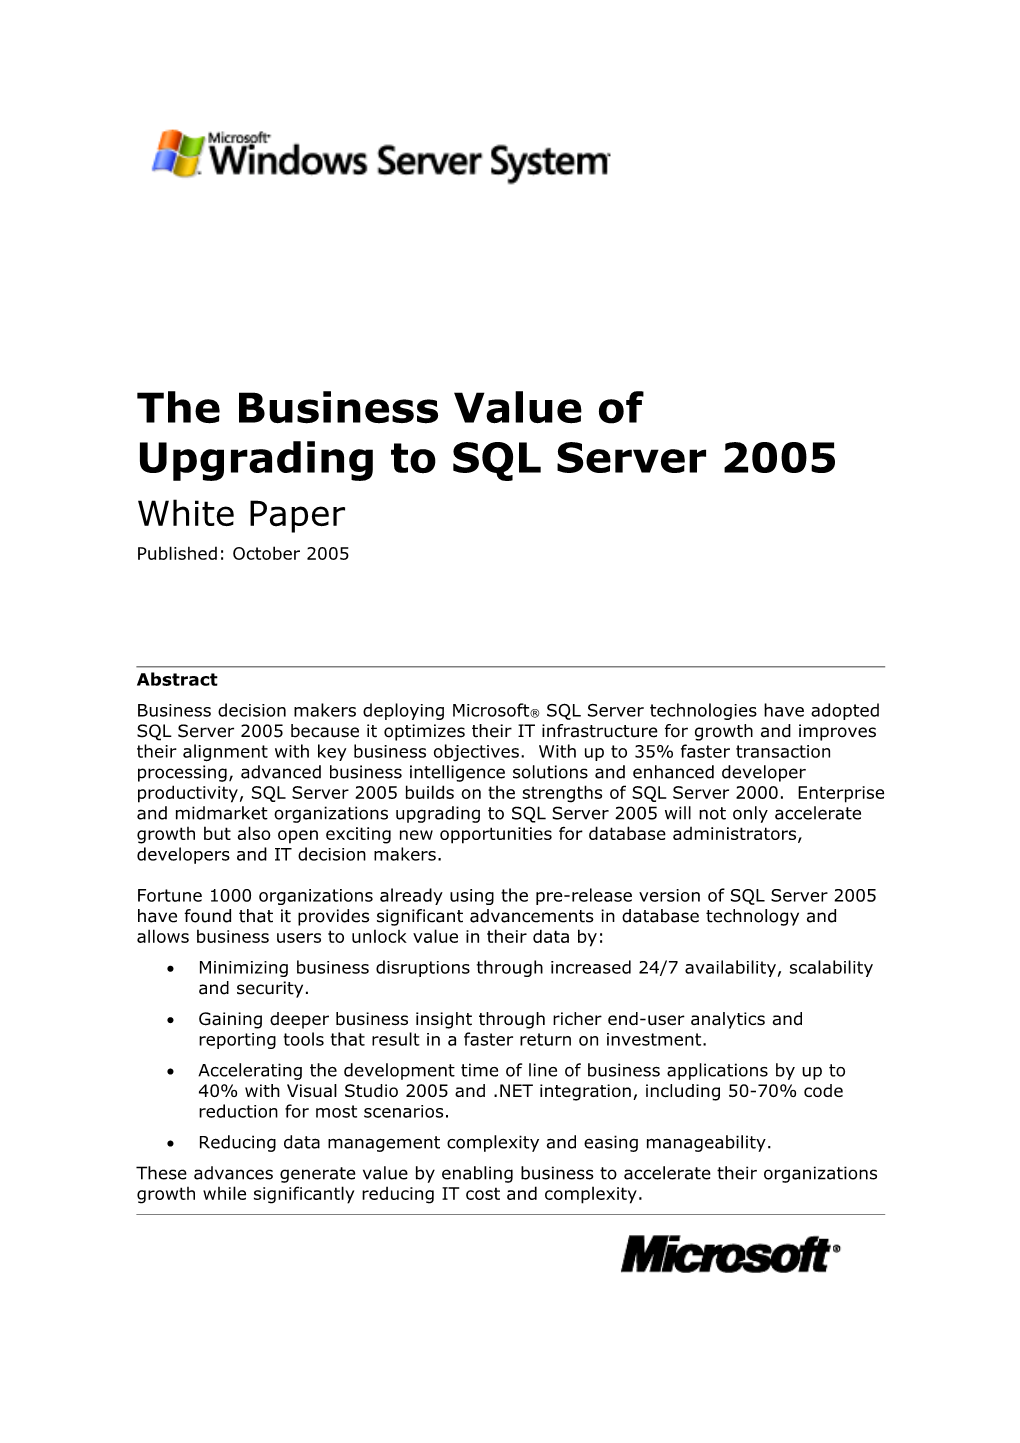 The Business Value of Upgrading to SQL Server 2005